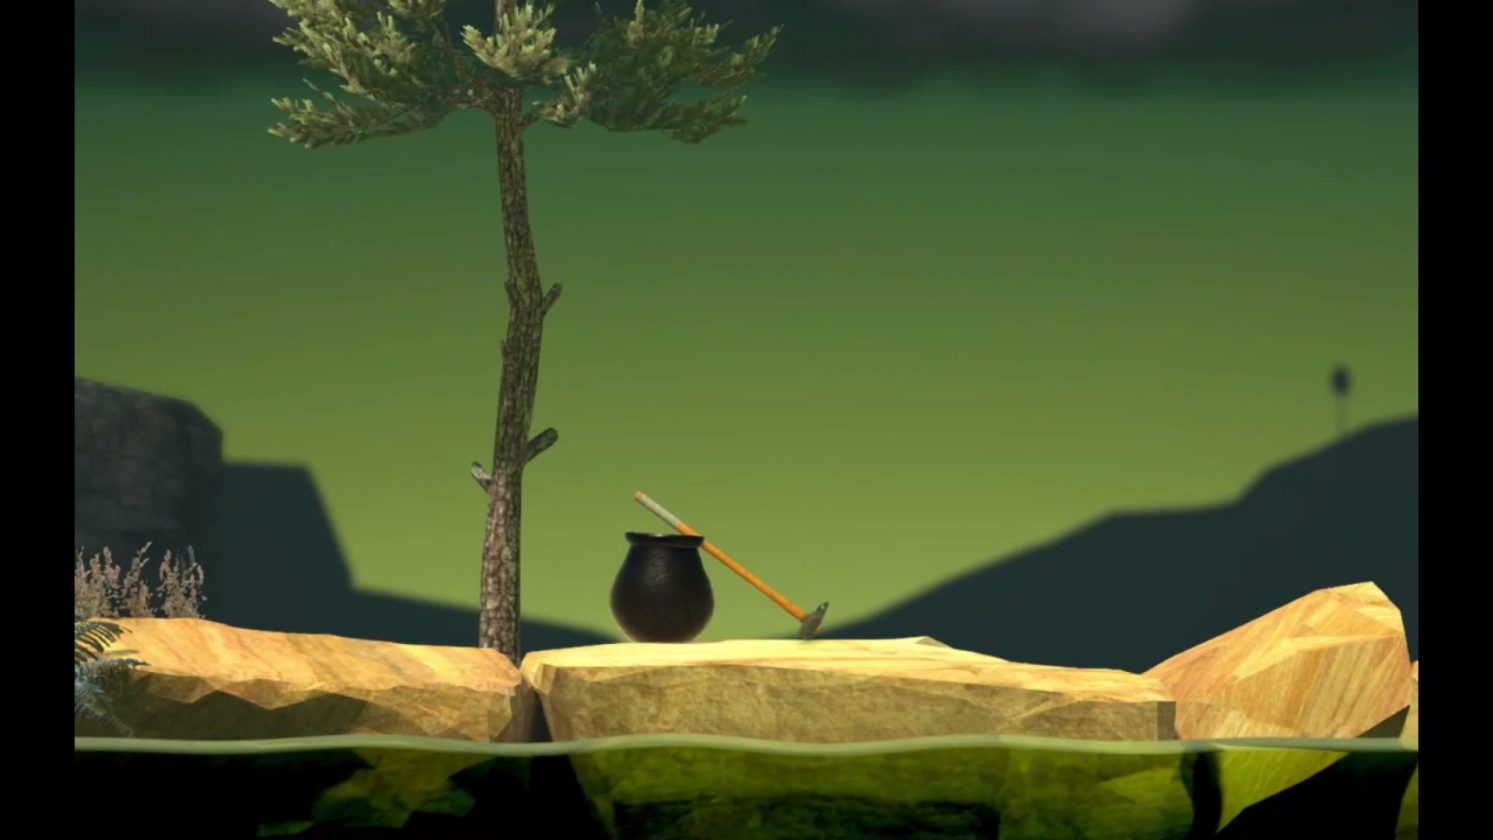 Game get help. Getting over it with Bennett Foddy. Getting over it похожие игры. Getting over it карта полностью. Камень из getting over it.